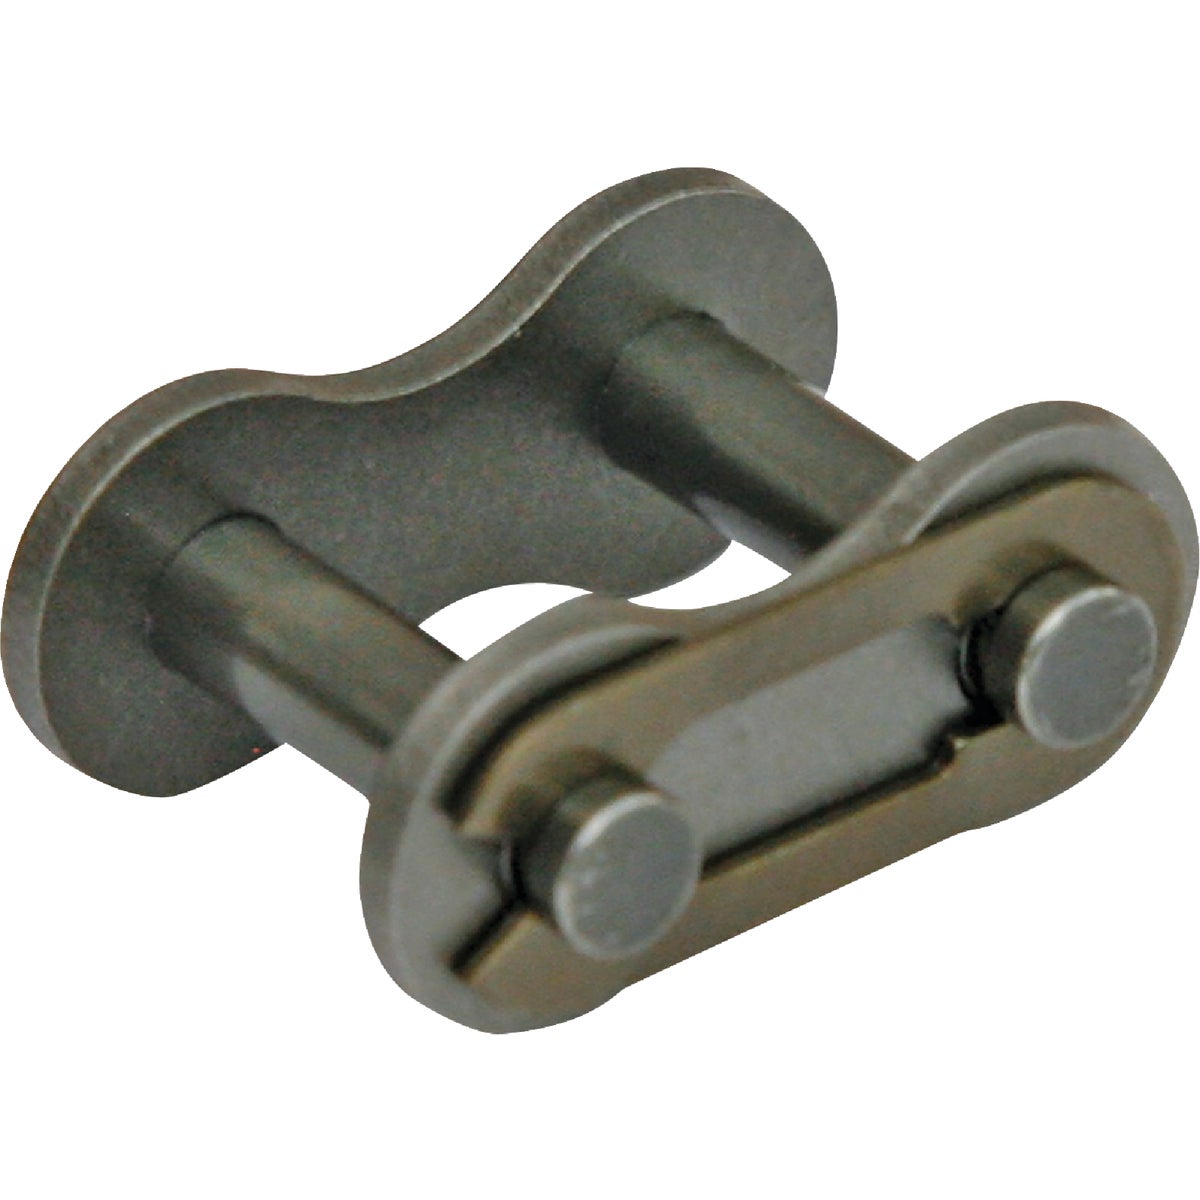 Item 755463, Single strand roller chain connector links can be used to join 2 pieces of 